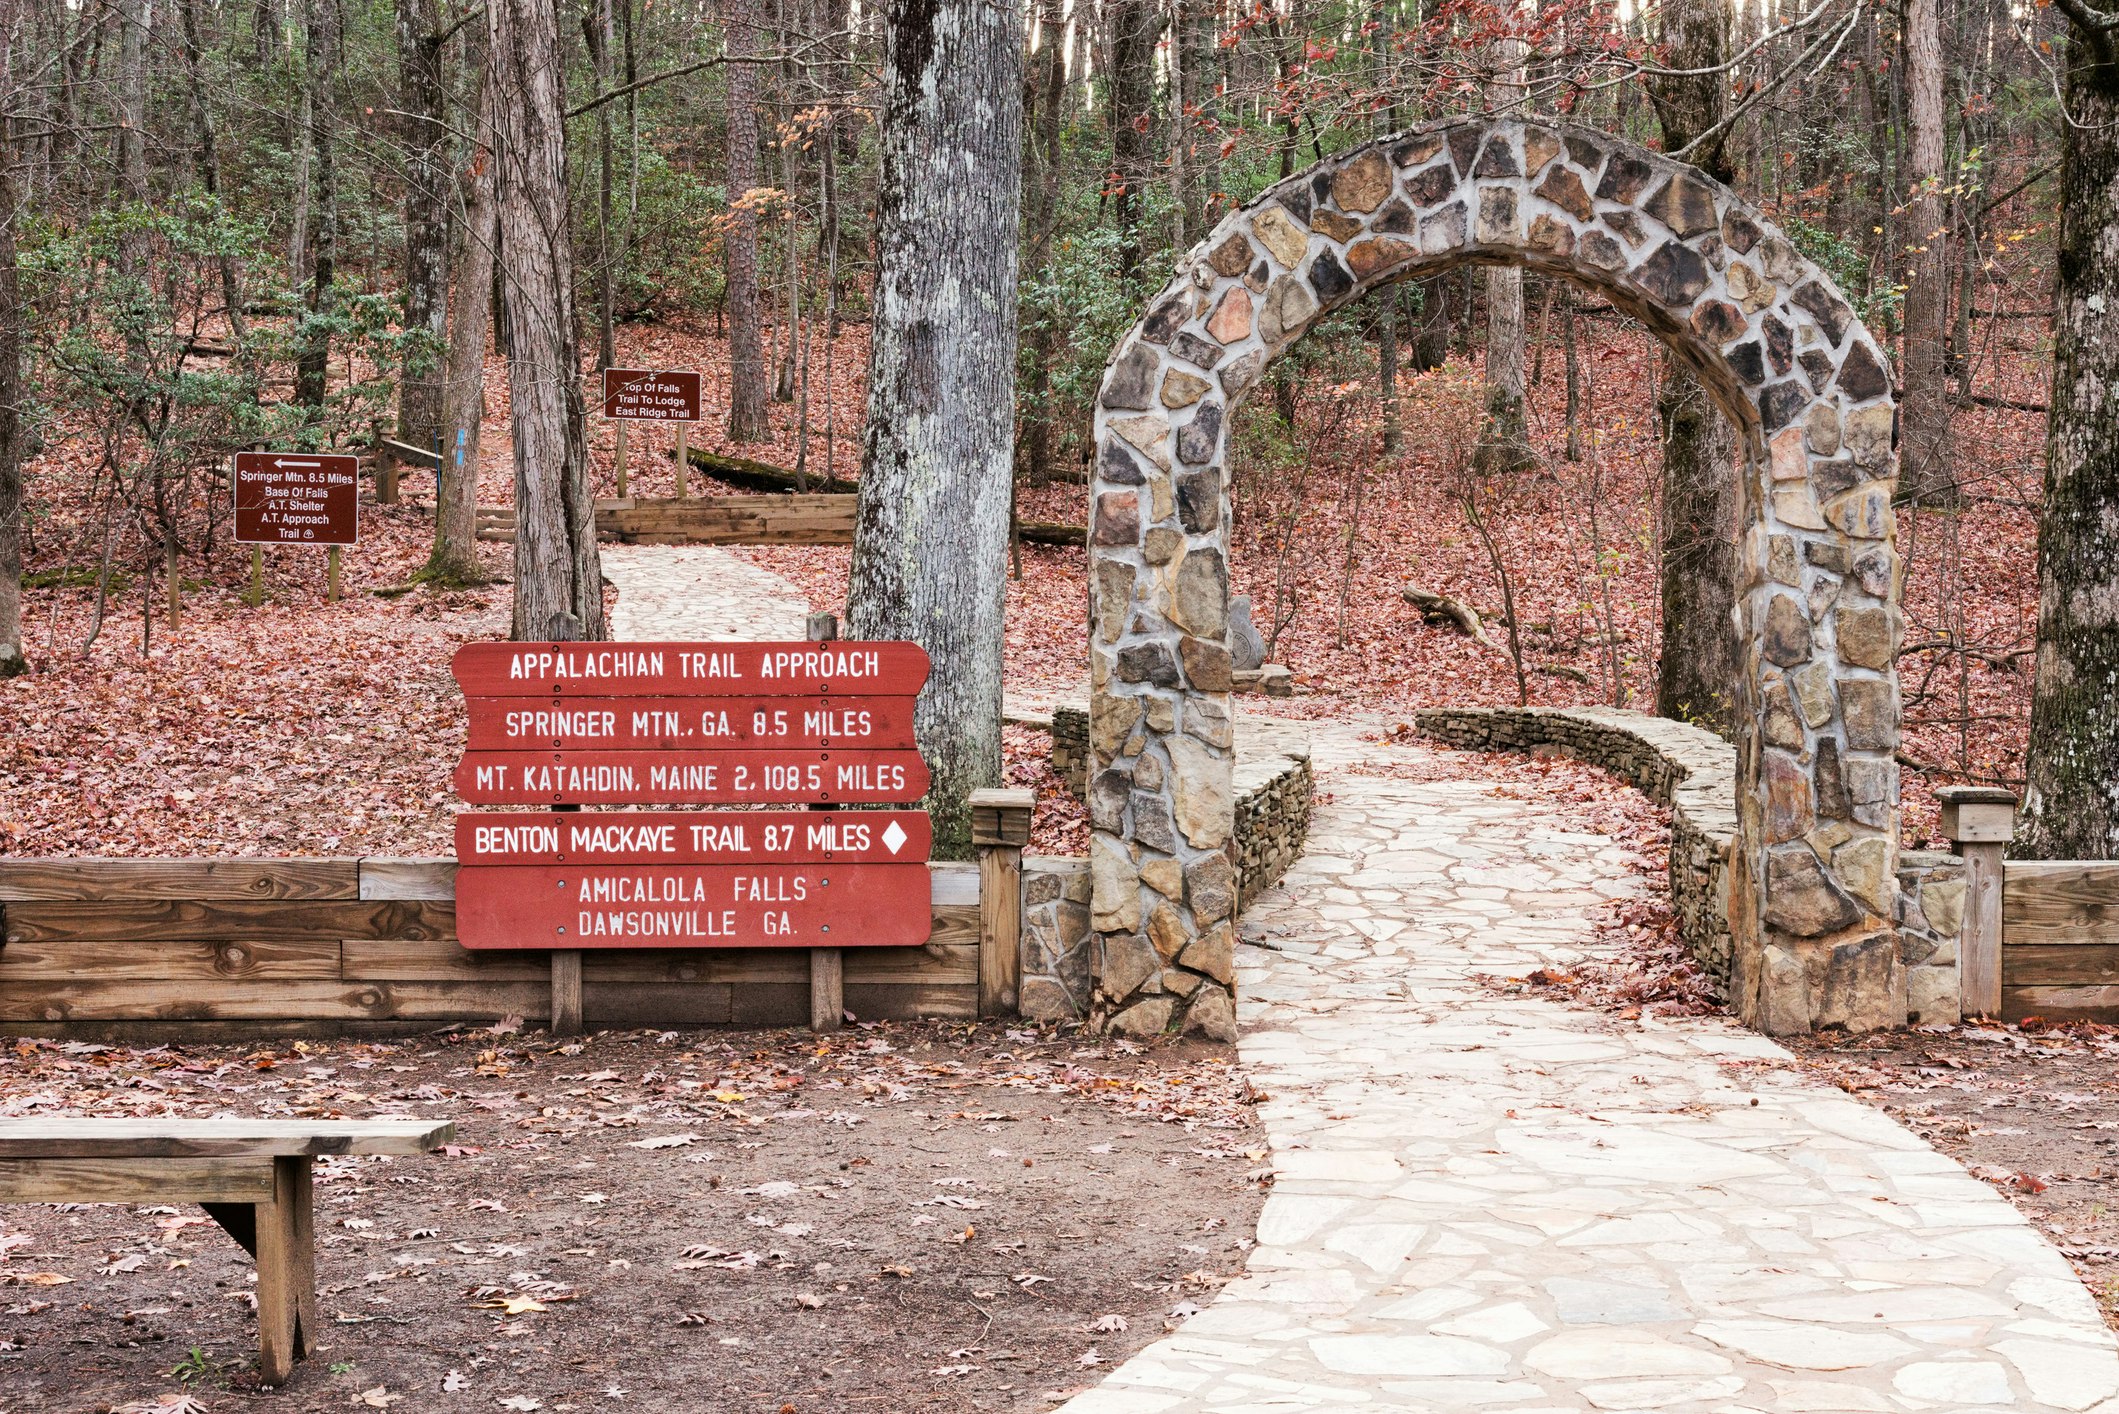 The famous stone arch at Amicalola Falls State Park marks the start of the Appalachian Trail approach segment that takes hikers to the southern terminus at Springer Mountain